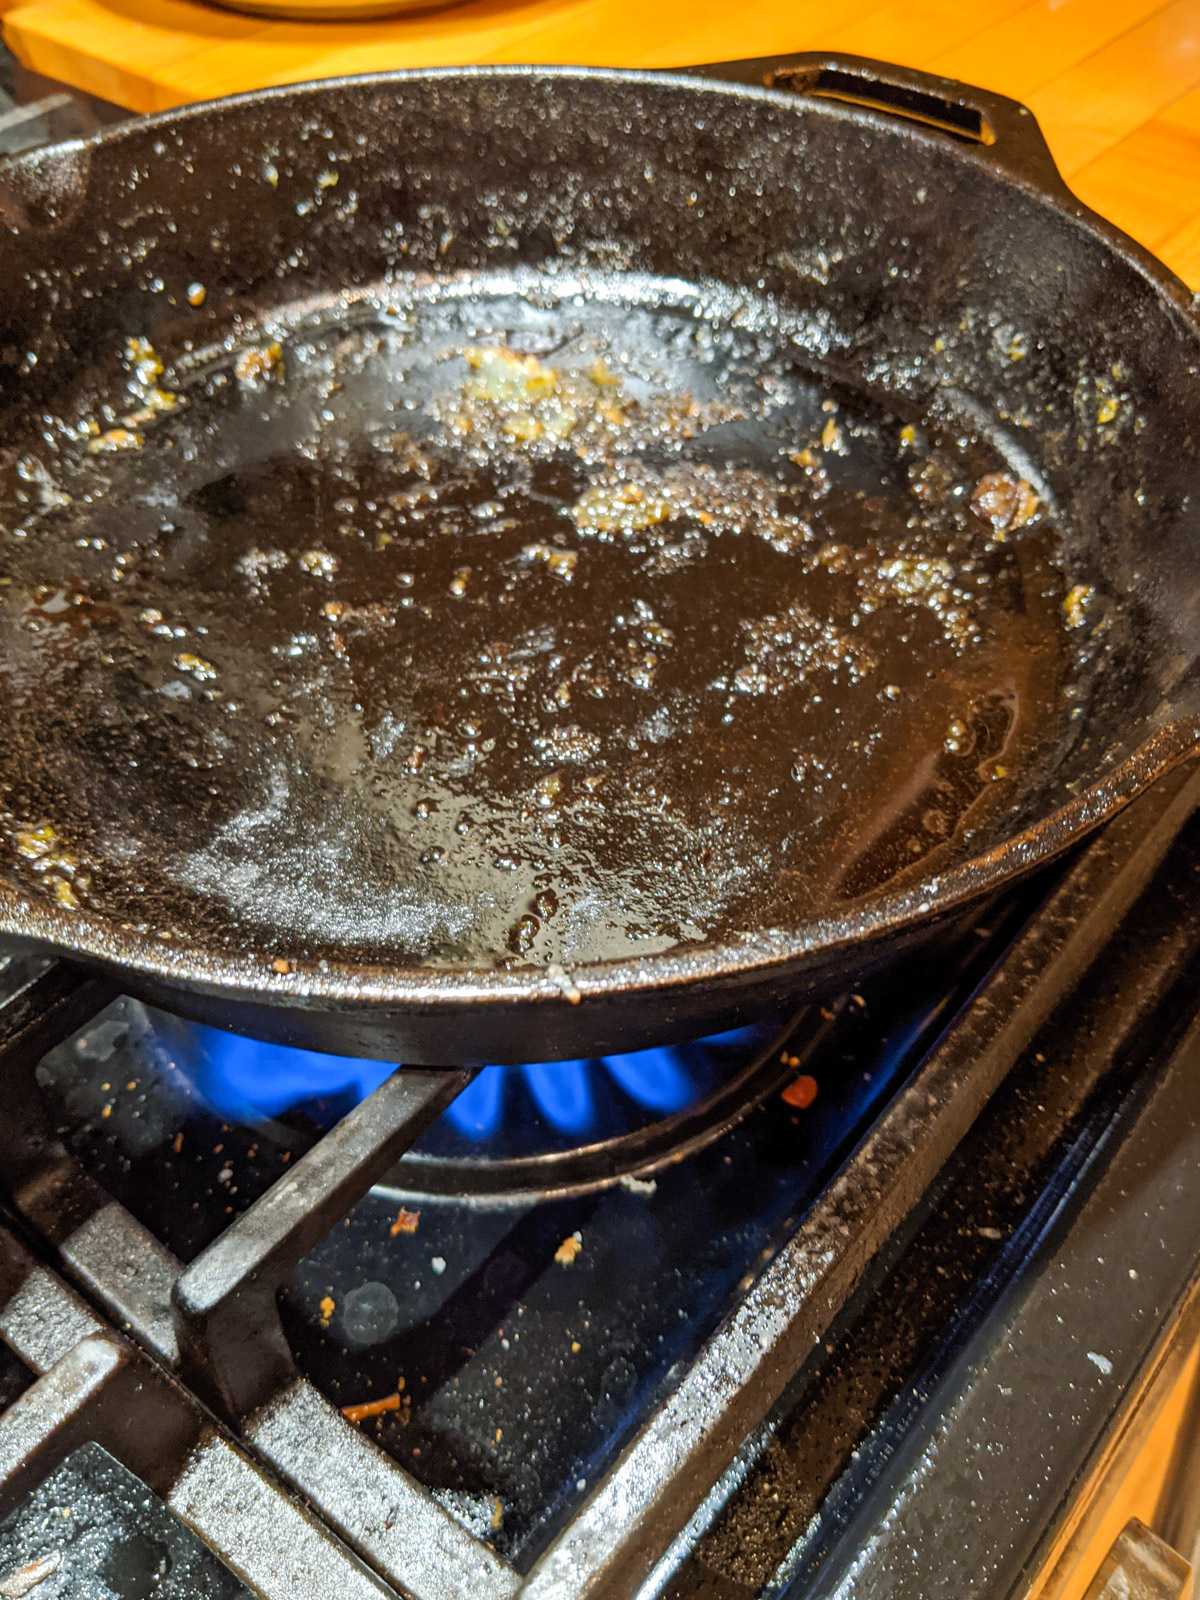 Heating up a dirty cast iron skillet on the stove top in order to deglaze it to clean it.